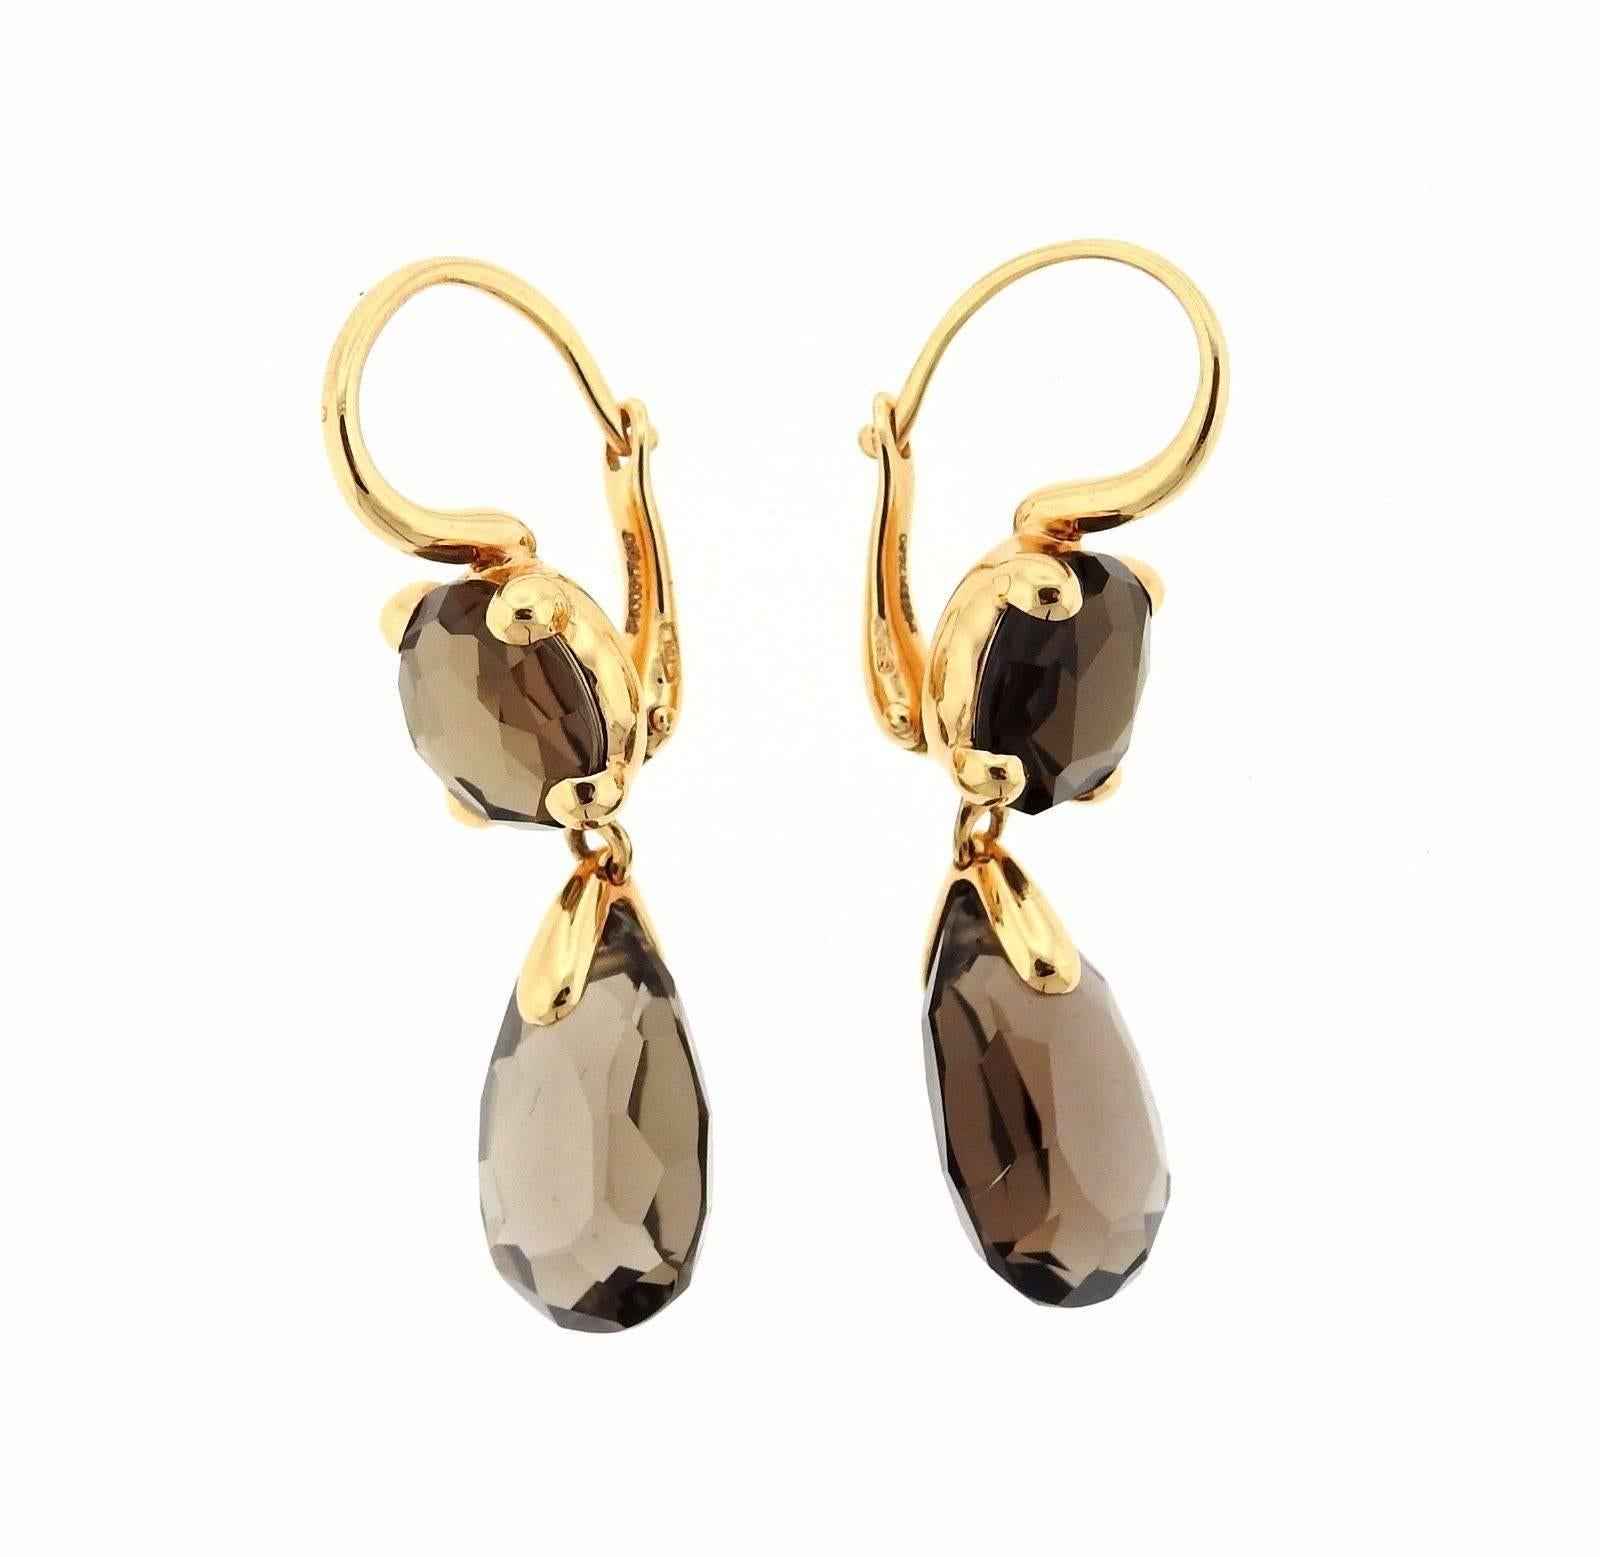 A pair of 18k yellow gold earrings set with smokey quartz.  The earrings are 35mm x 9mm and weigh 8.6 grams.  Marked: Pomellato, 750.